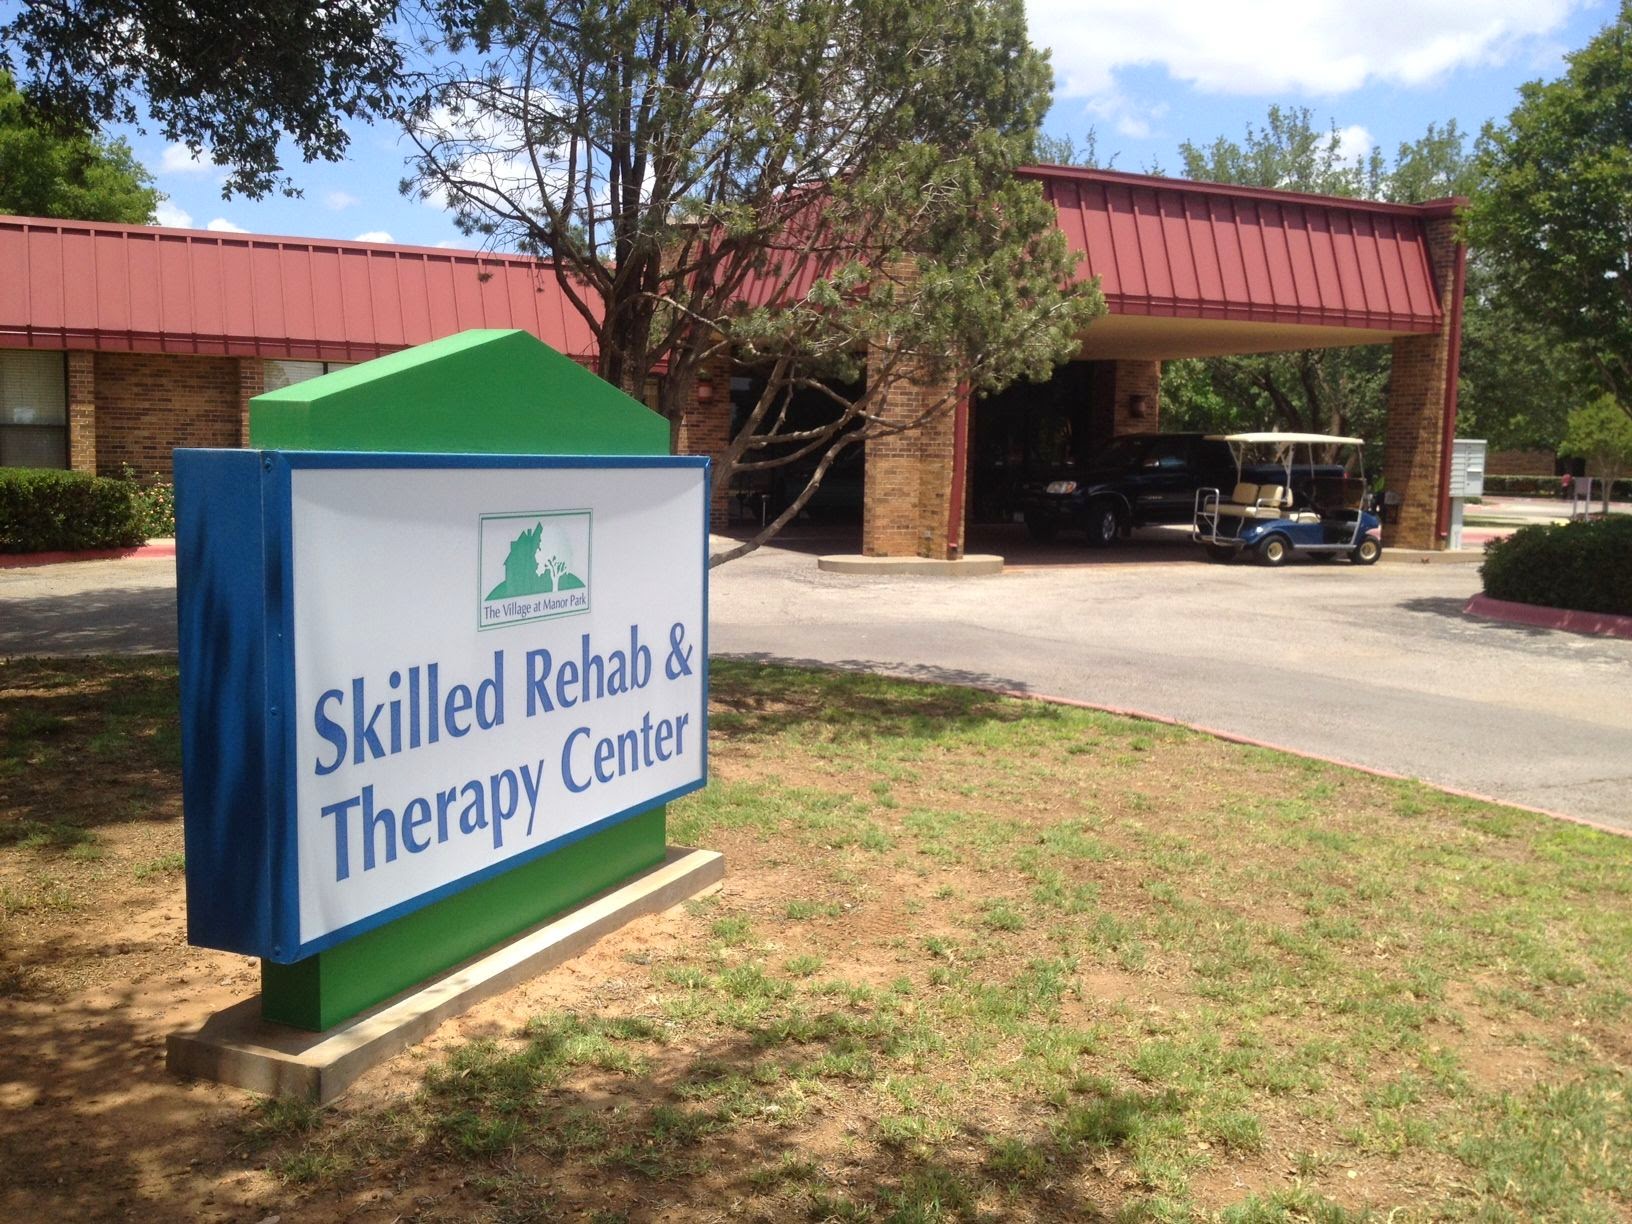 Manor Park Skilled Rehab and Therapy Center